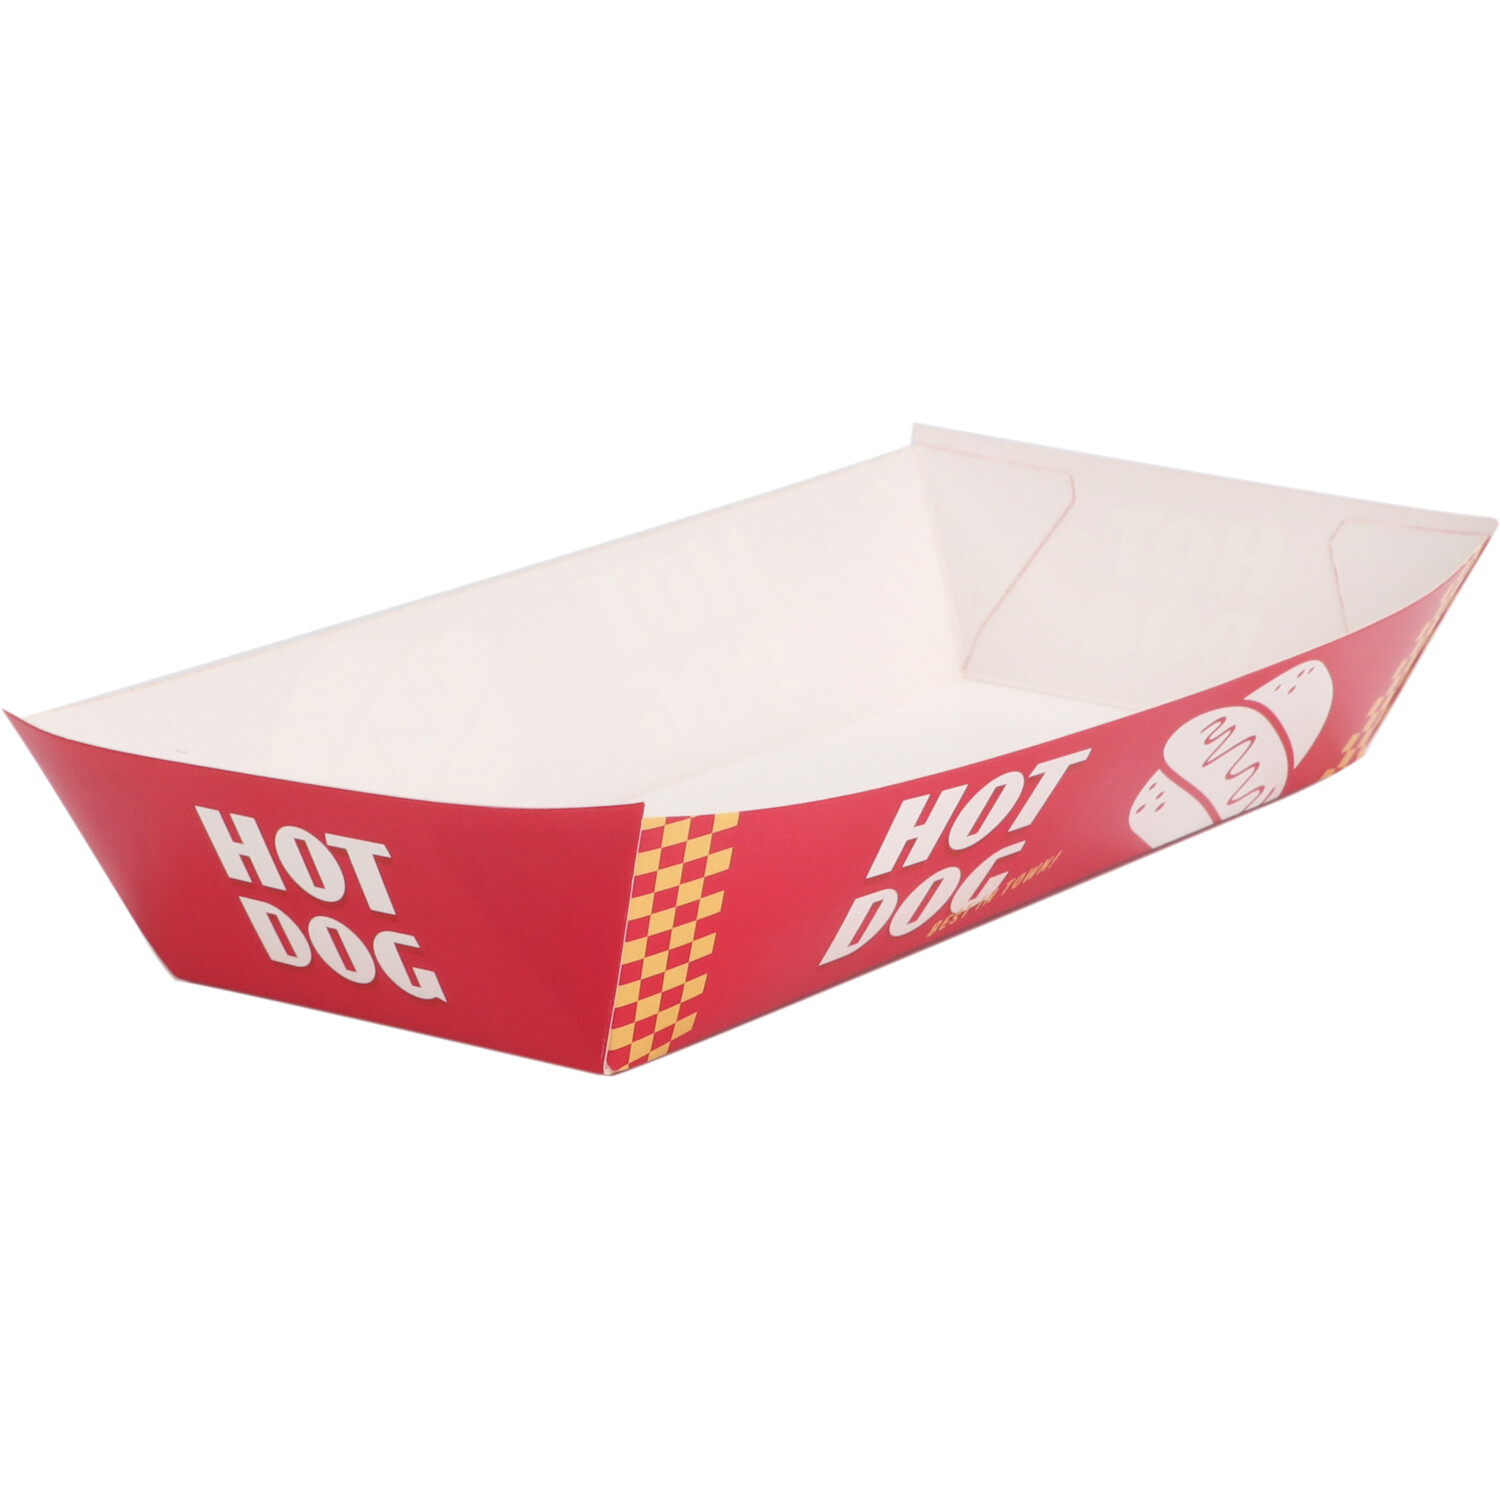 Pack of 8 Hot Dog Trays  - Red Image